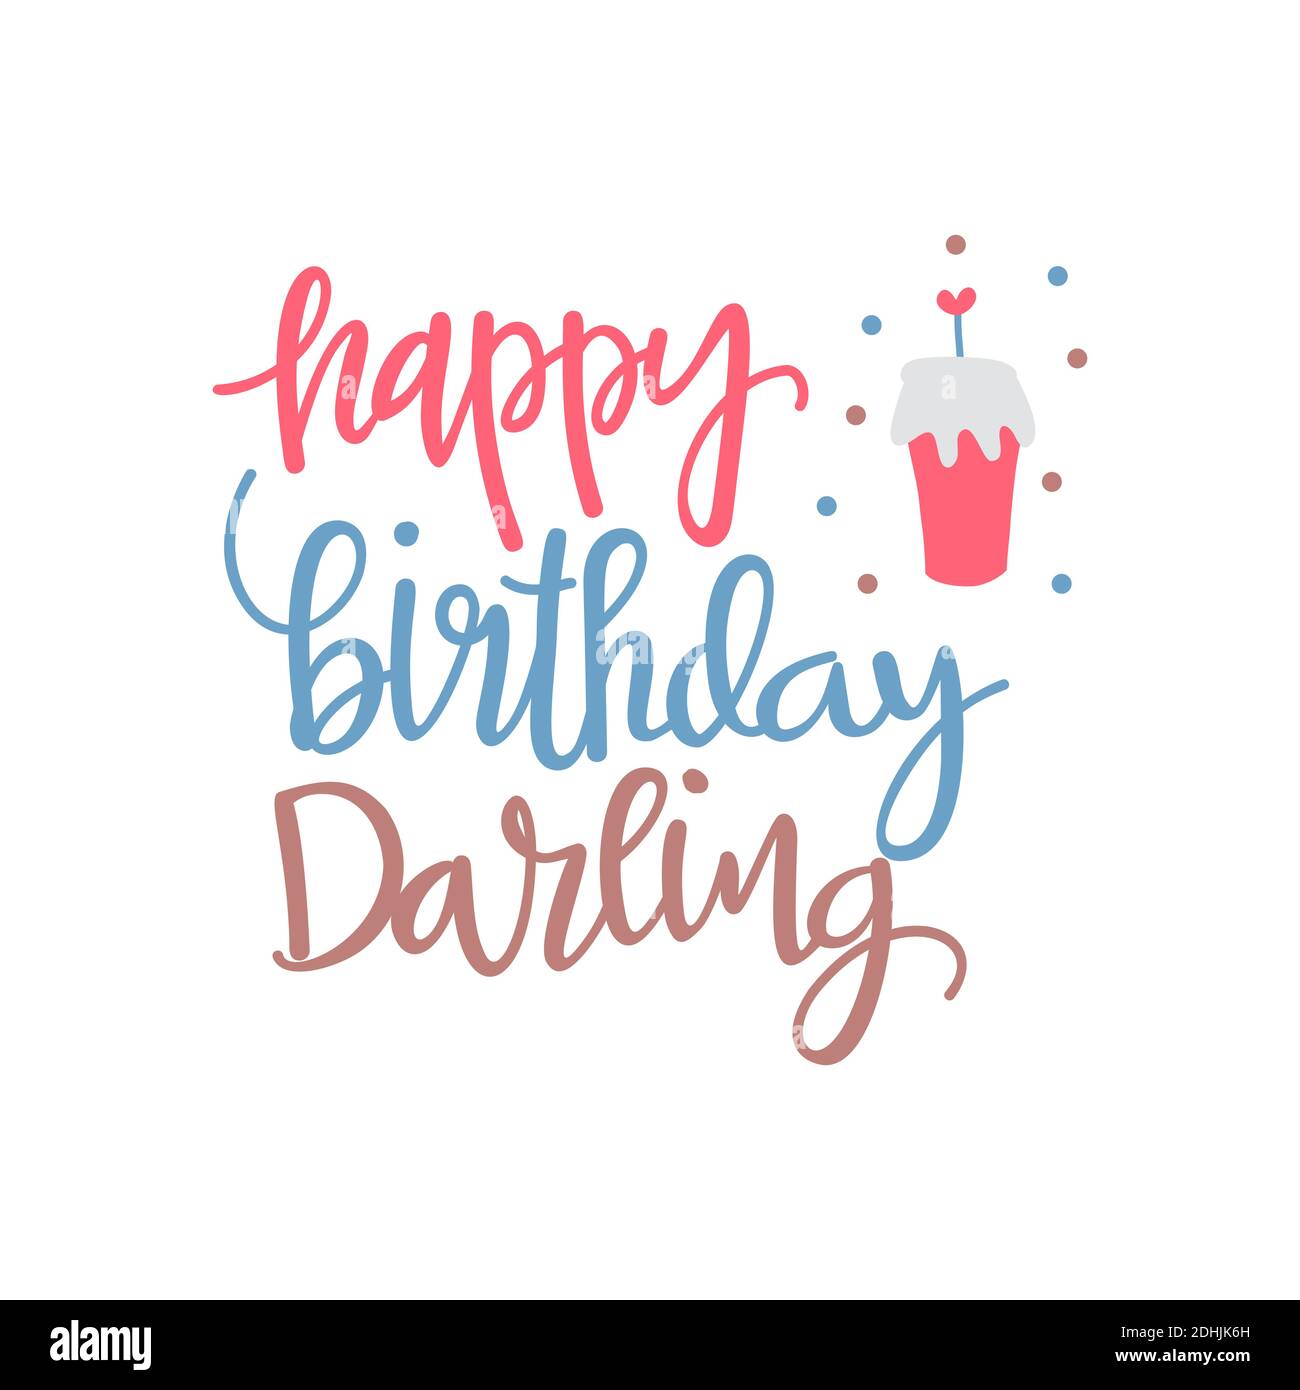 Happy Birthday My Darling inscription or wish written with elegant calligraphic font and decorated with colorful flag garlands and confetti. Hand draw Stock Vector